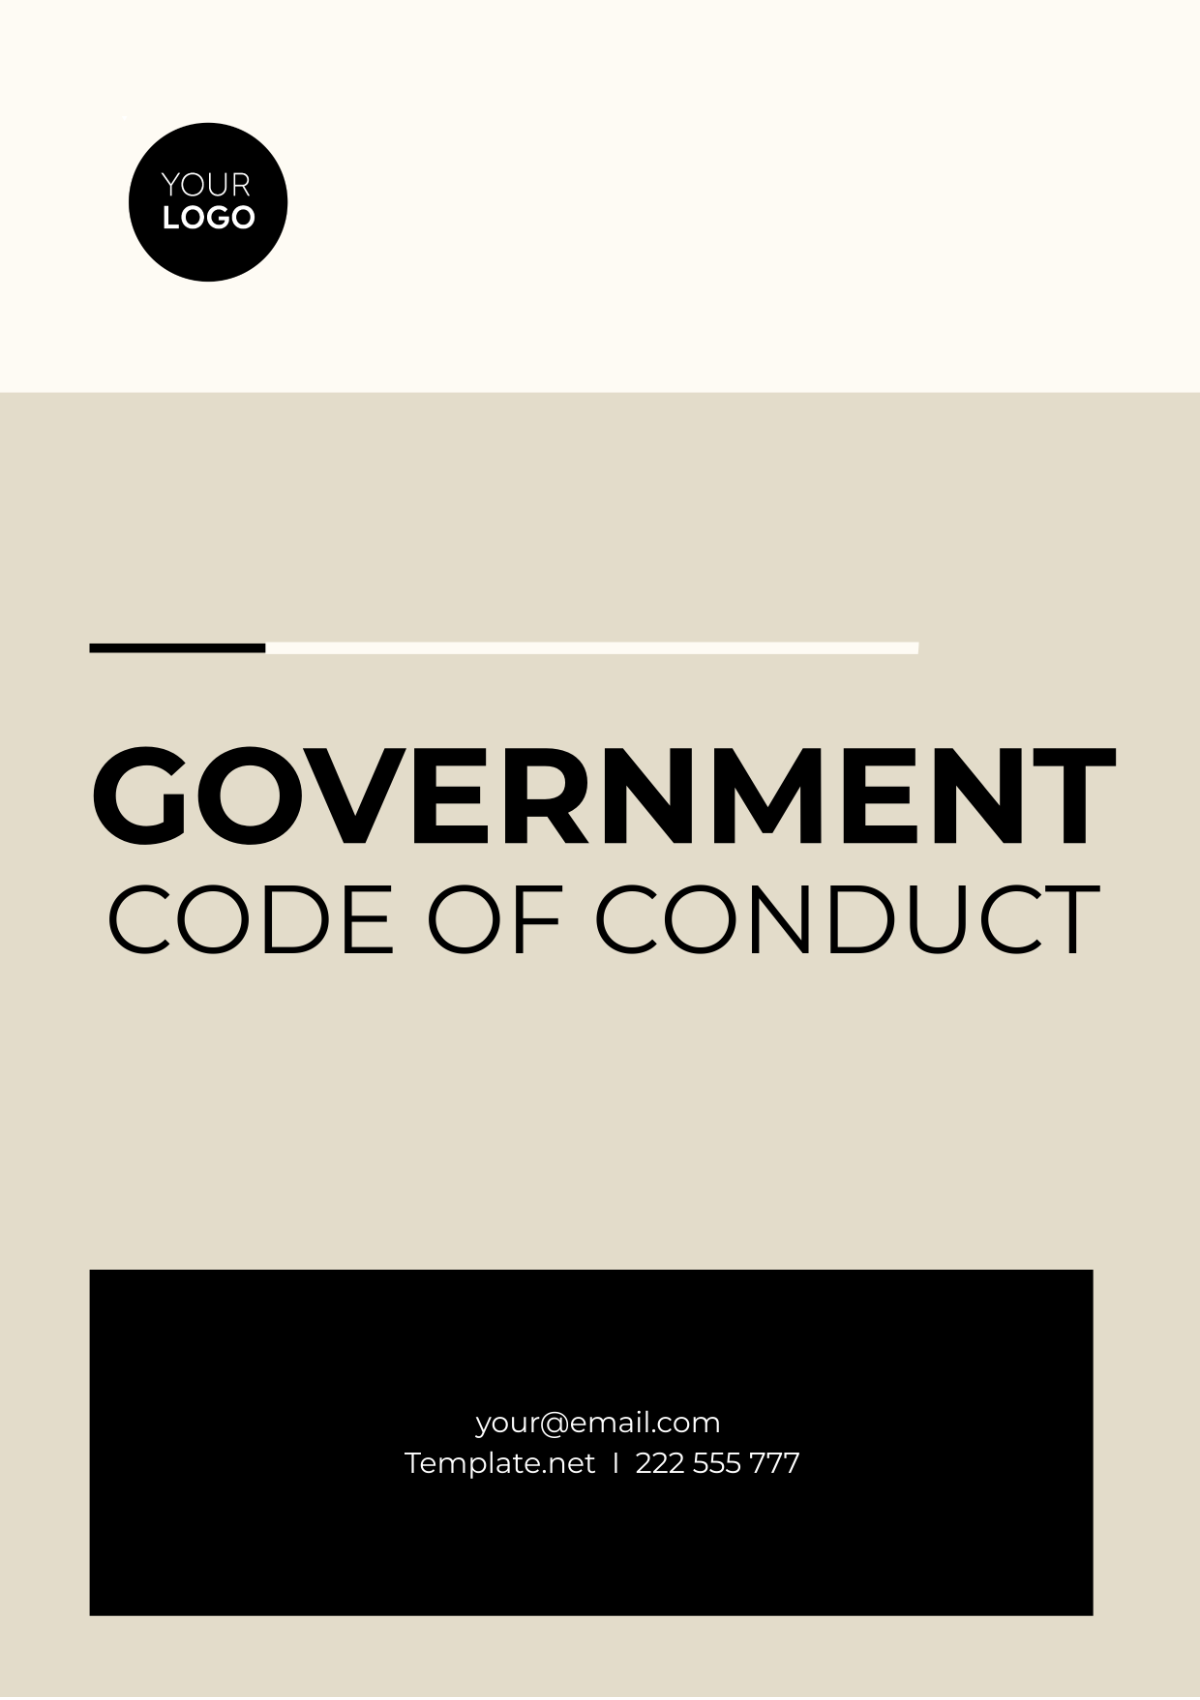 Government Code of Conduct Template